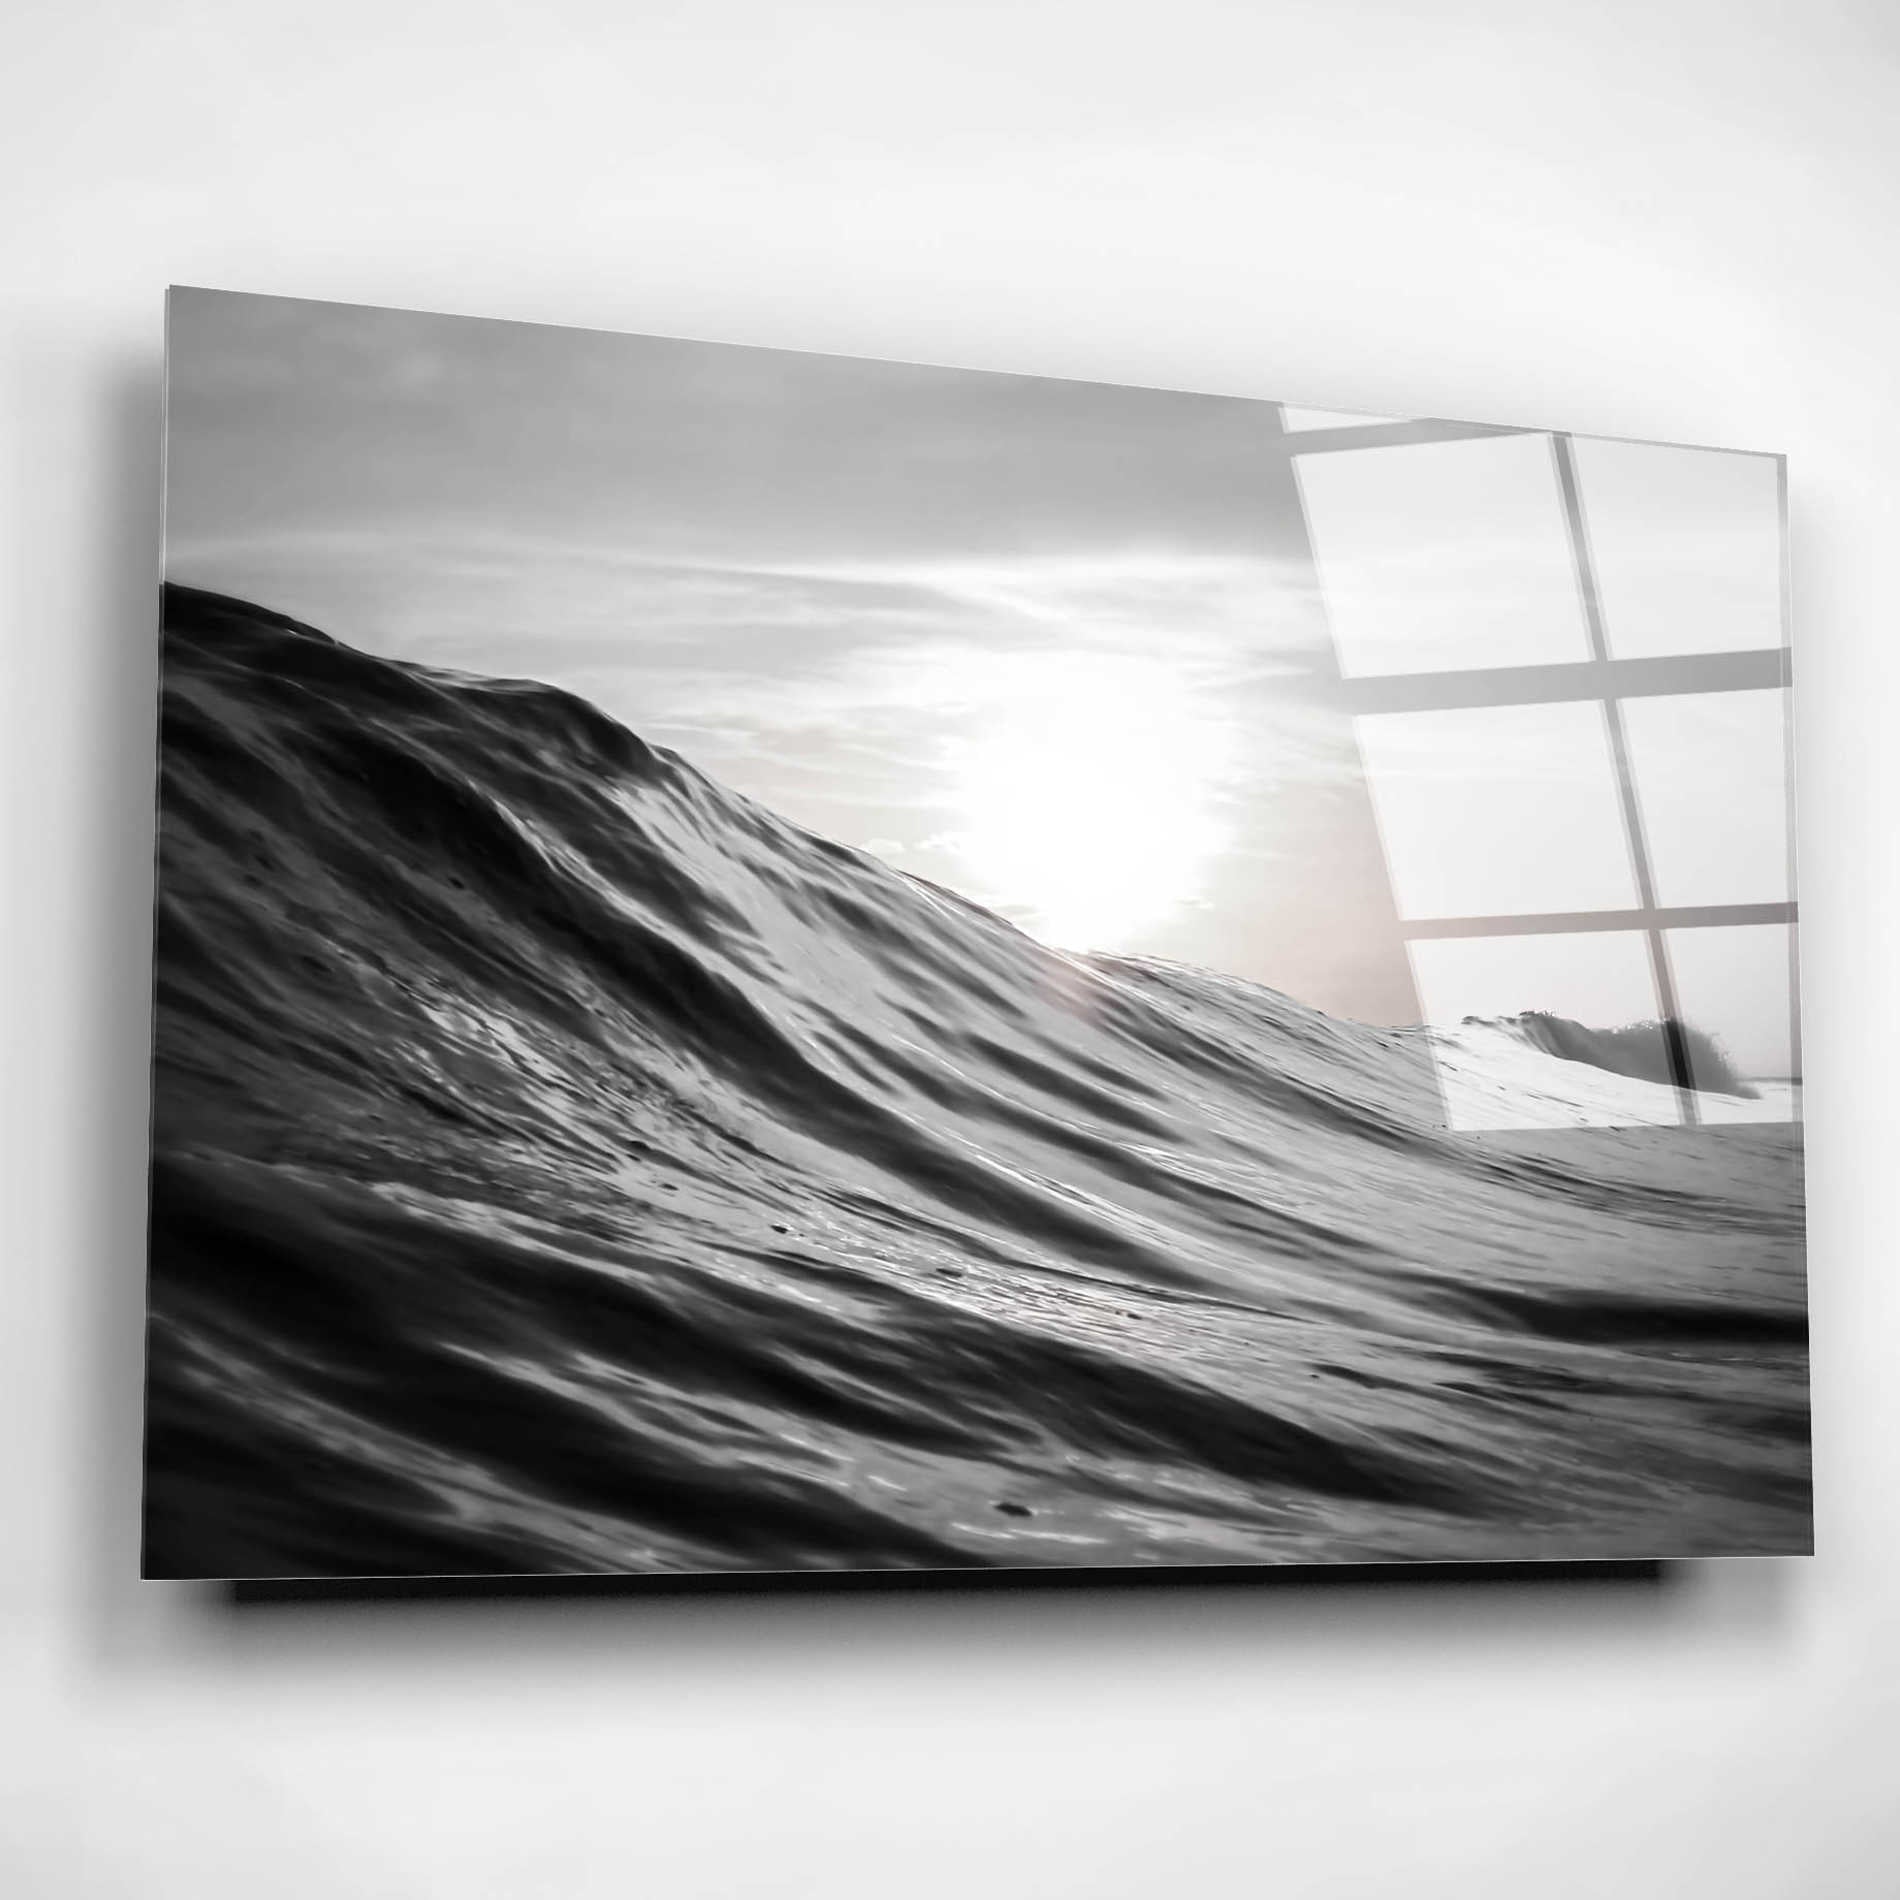 Epic Art 'Motion Of Water' by Nicklas Gustafsson Acrylic Glass Wall Art,24x16